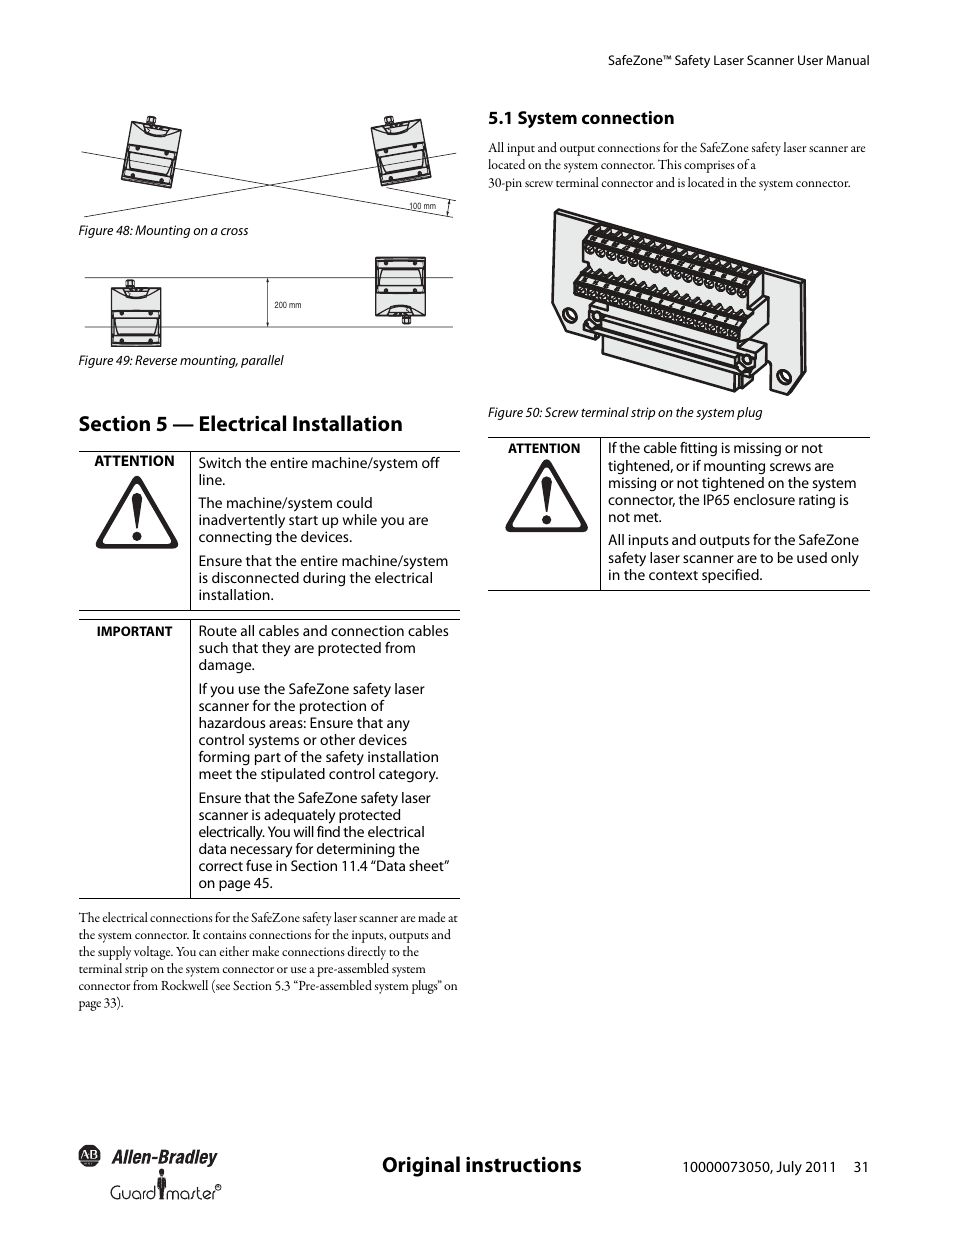 Original instructions, 1 system connection | Rockwell Automation 442L SafeZone Singlezone & Multizone Safety Laser Scanner User Manual | Page 33 / 60